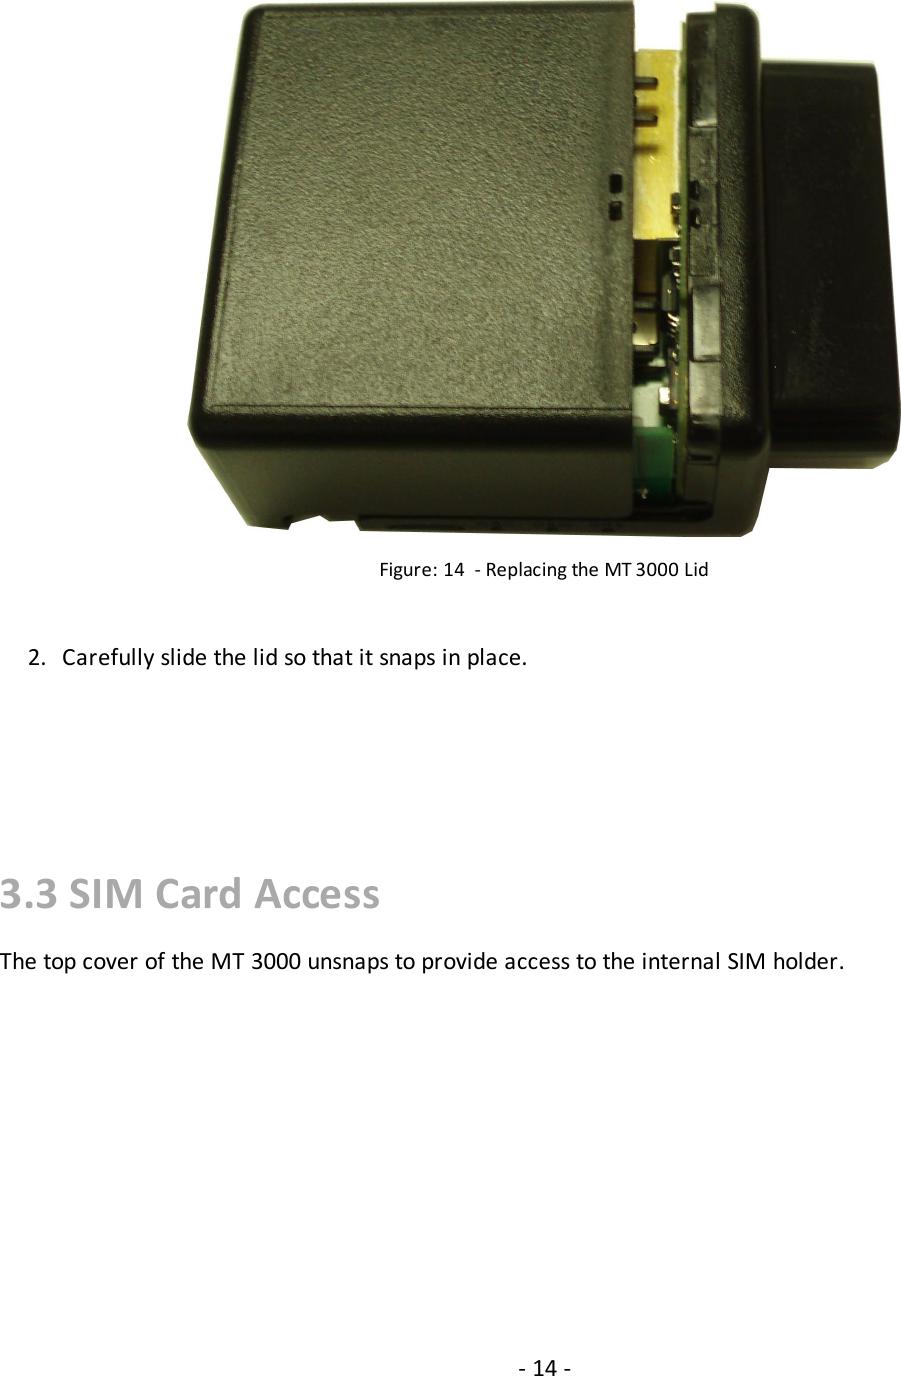 Figure: 14 - Replacing the MT 3000 Lid2. Carefully slide the lid so that it snaps in place.3.3 SIM Card AccessThe top cover of the MT 3000 unsnaps to provide access to the internal SIM holder.- 14 -